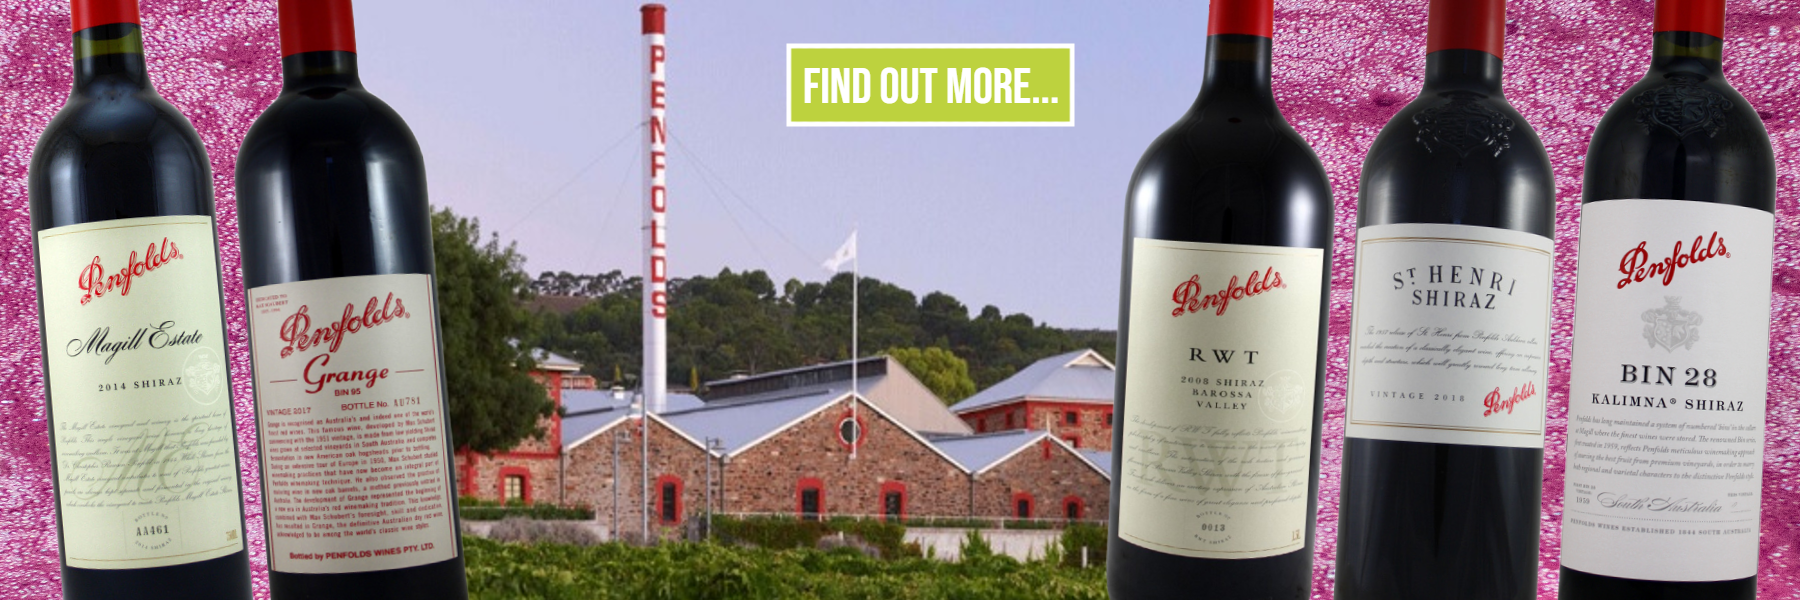 Find out more about Penfolds wines from Frazier's